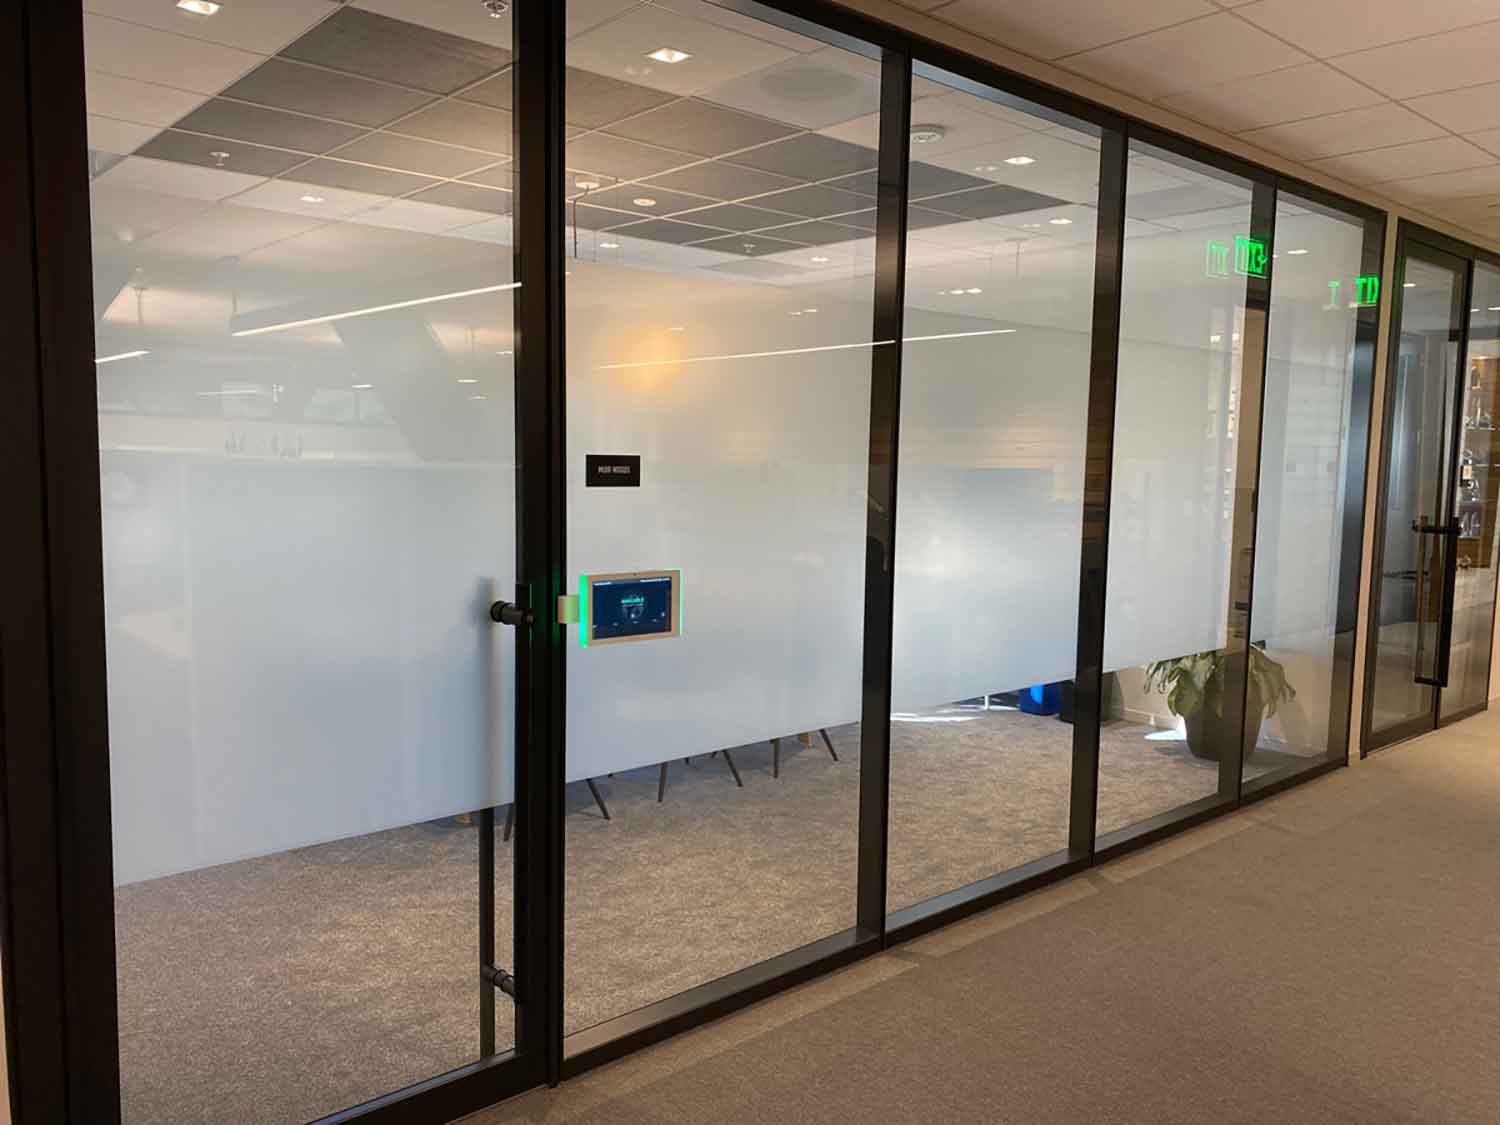 The ClimatePro team installed a band of 3M privacy window tint to this office in Novato, CA.